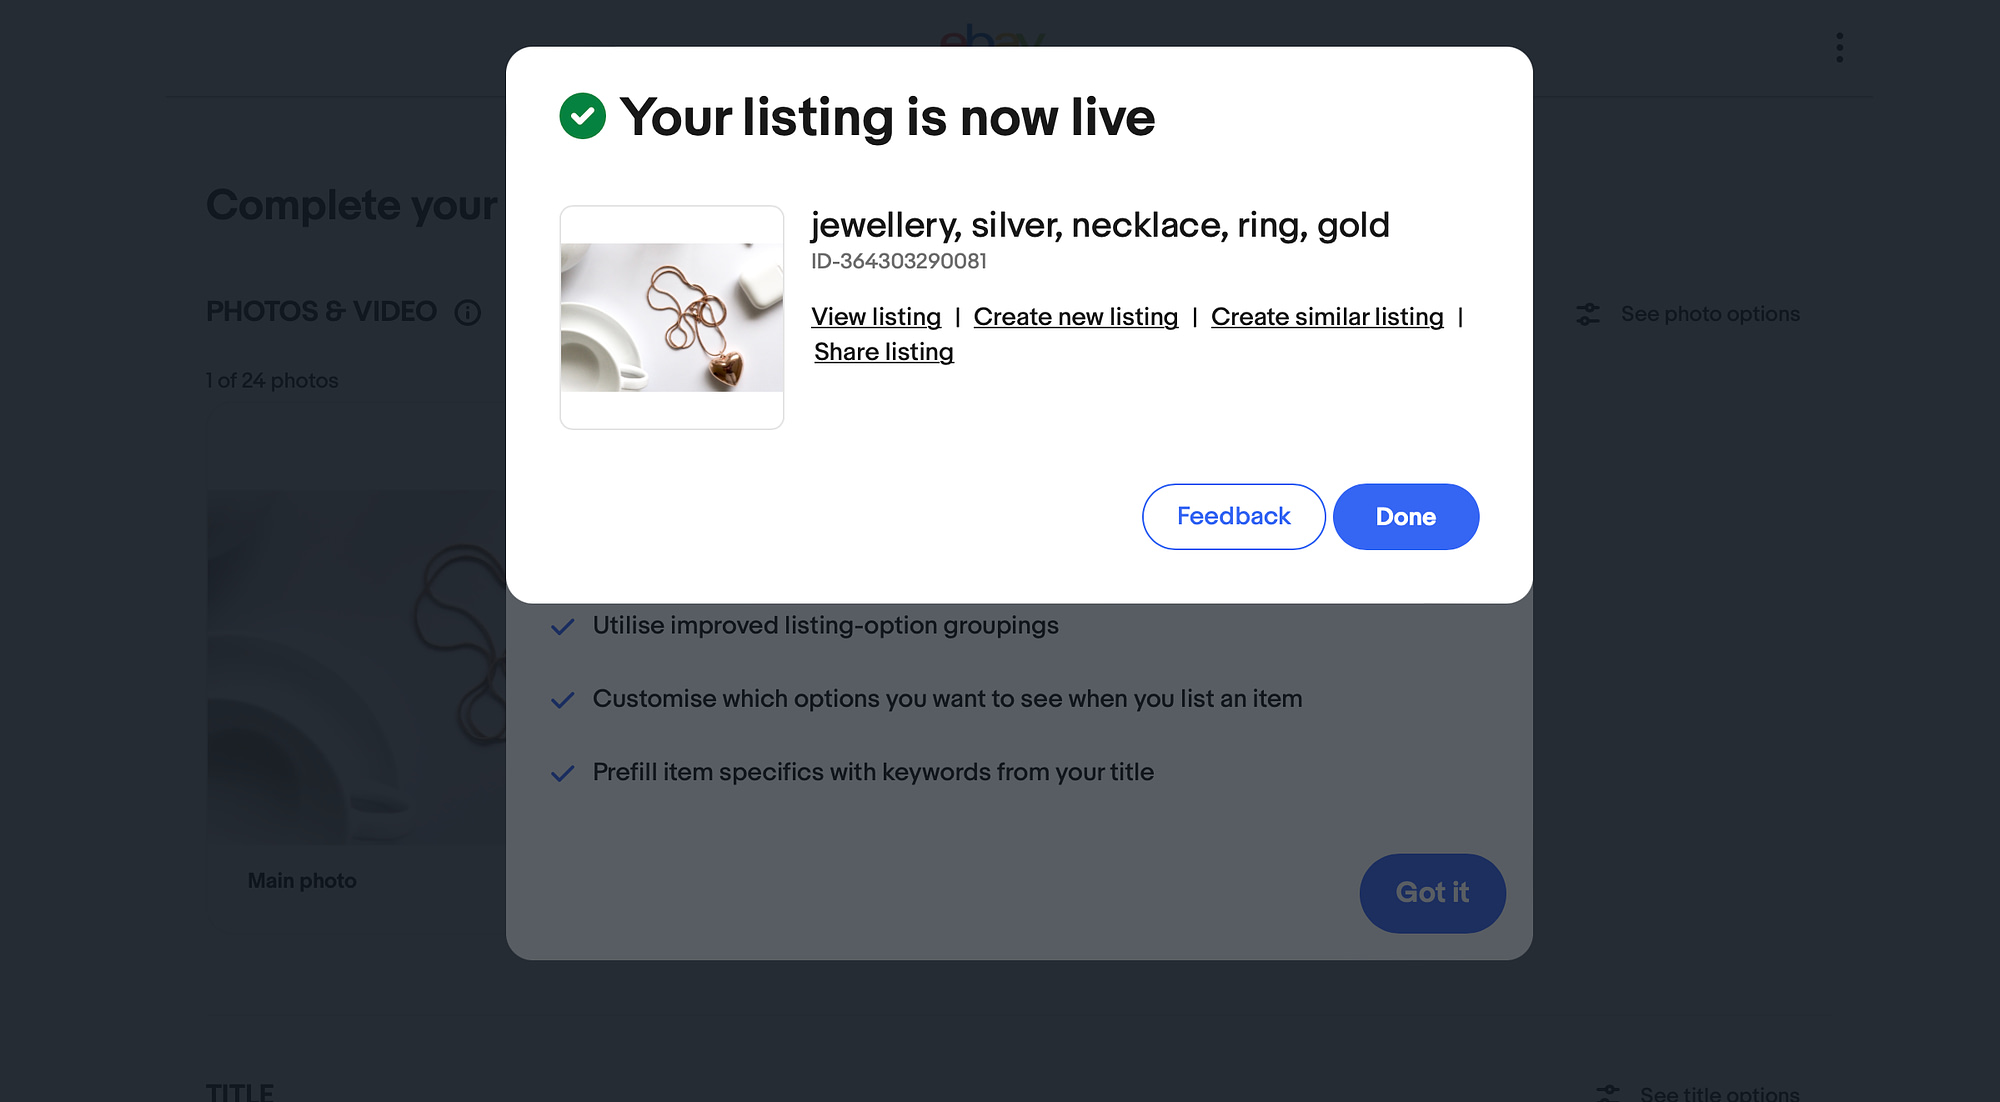 "Your listing is now live" screen from eBay for eBay vs Etsy vs WooCommerce comparison.